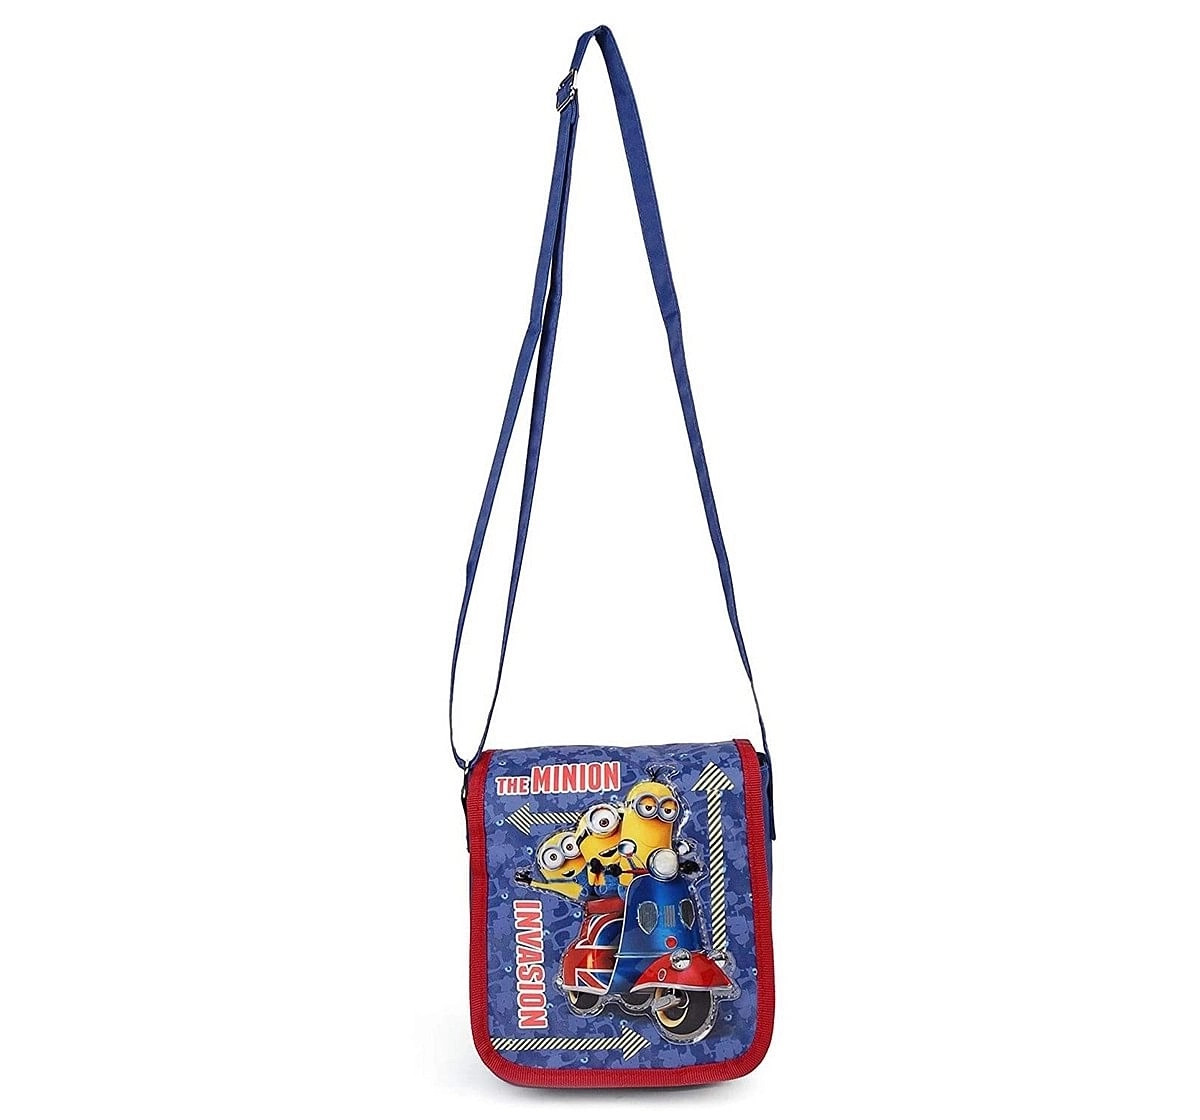 Minion Invasion Blue Sling Bag for Kids age 3Y+ 